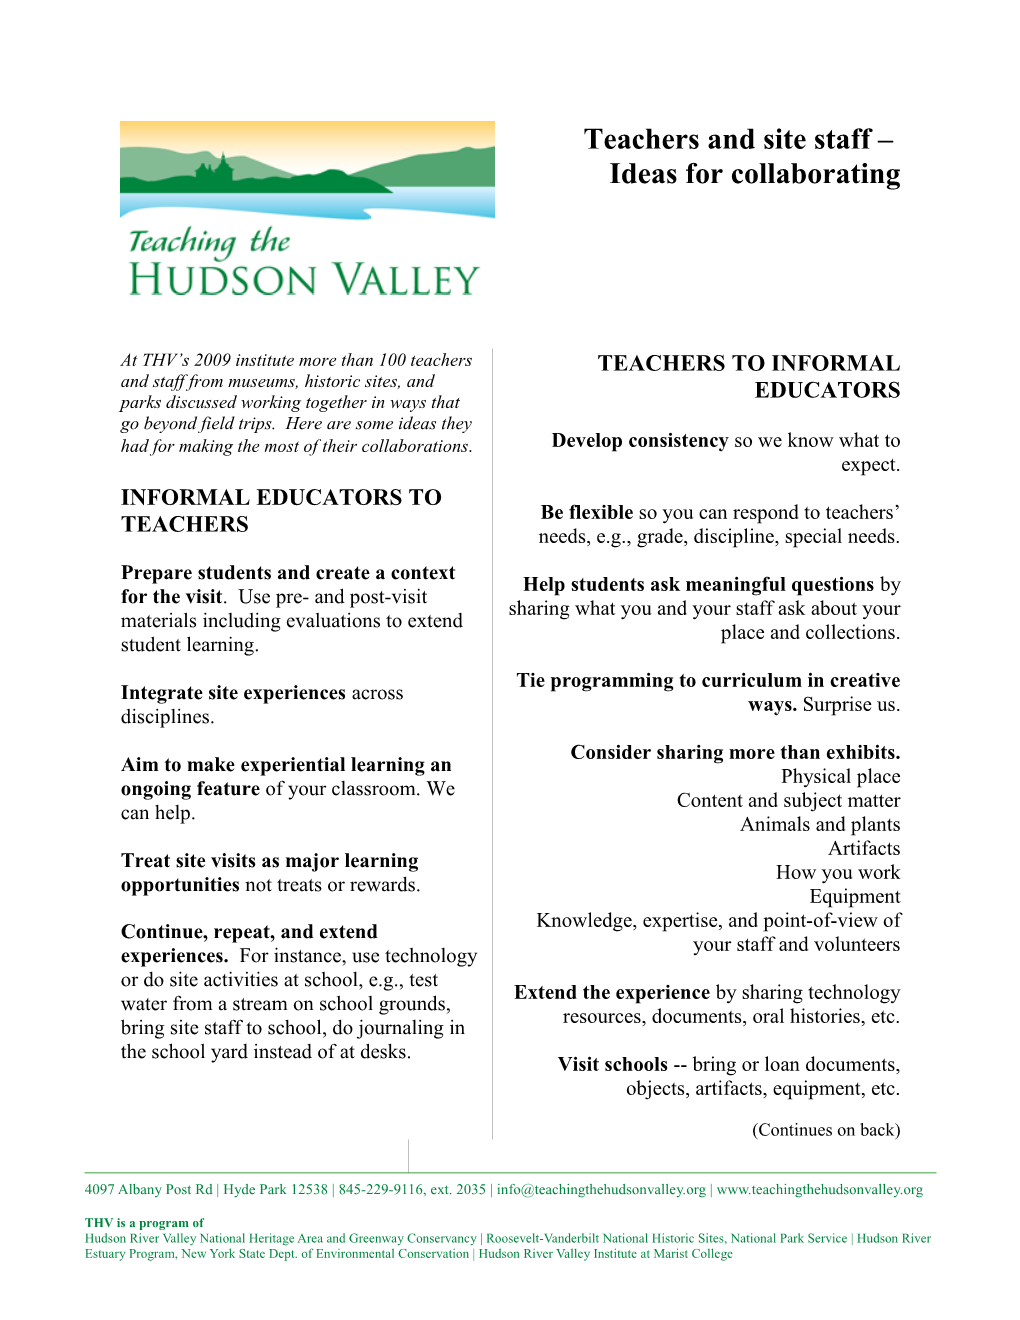 Value Added When Formal and Informal Educators Collaborate